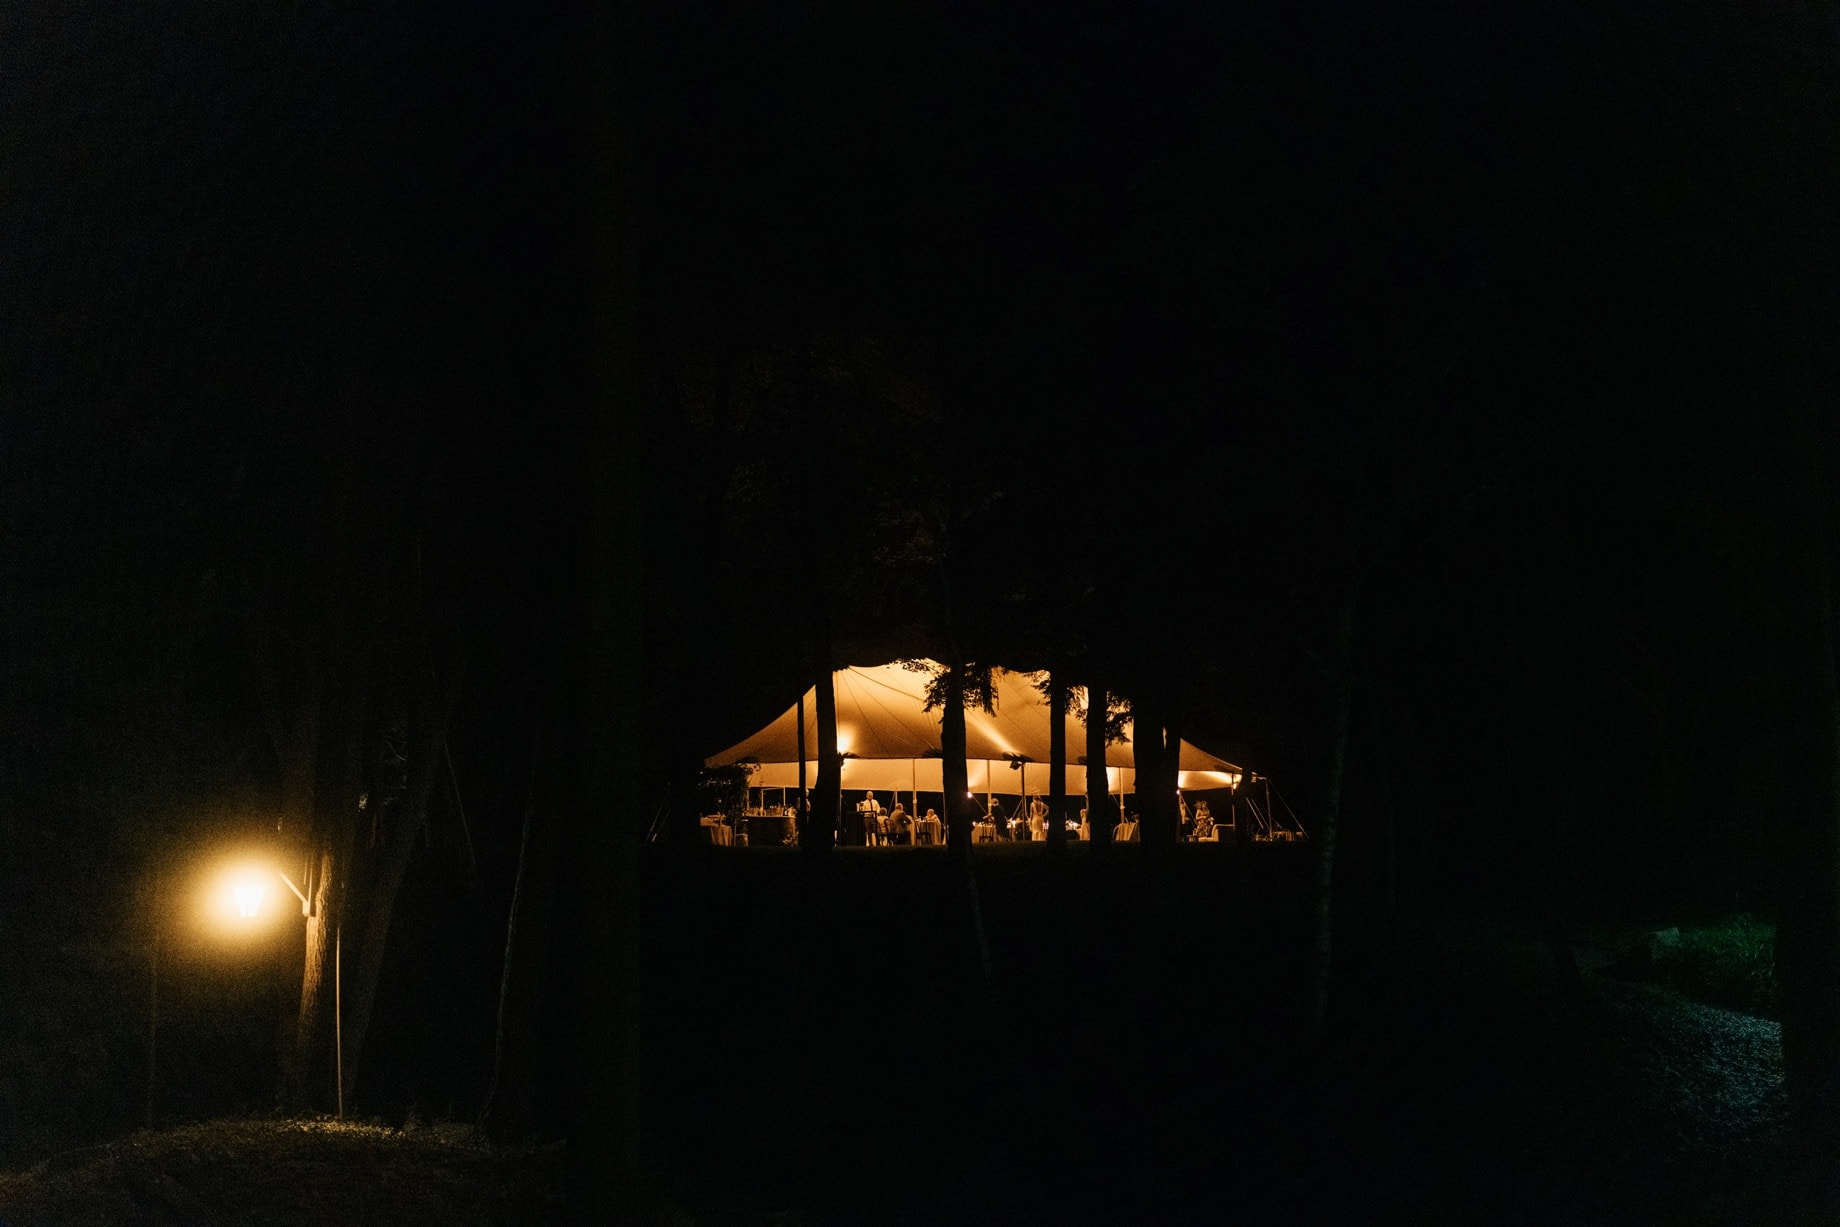 a night shot of a wedding reception tent in the woods